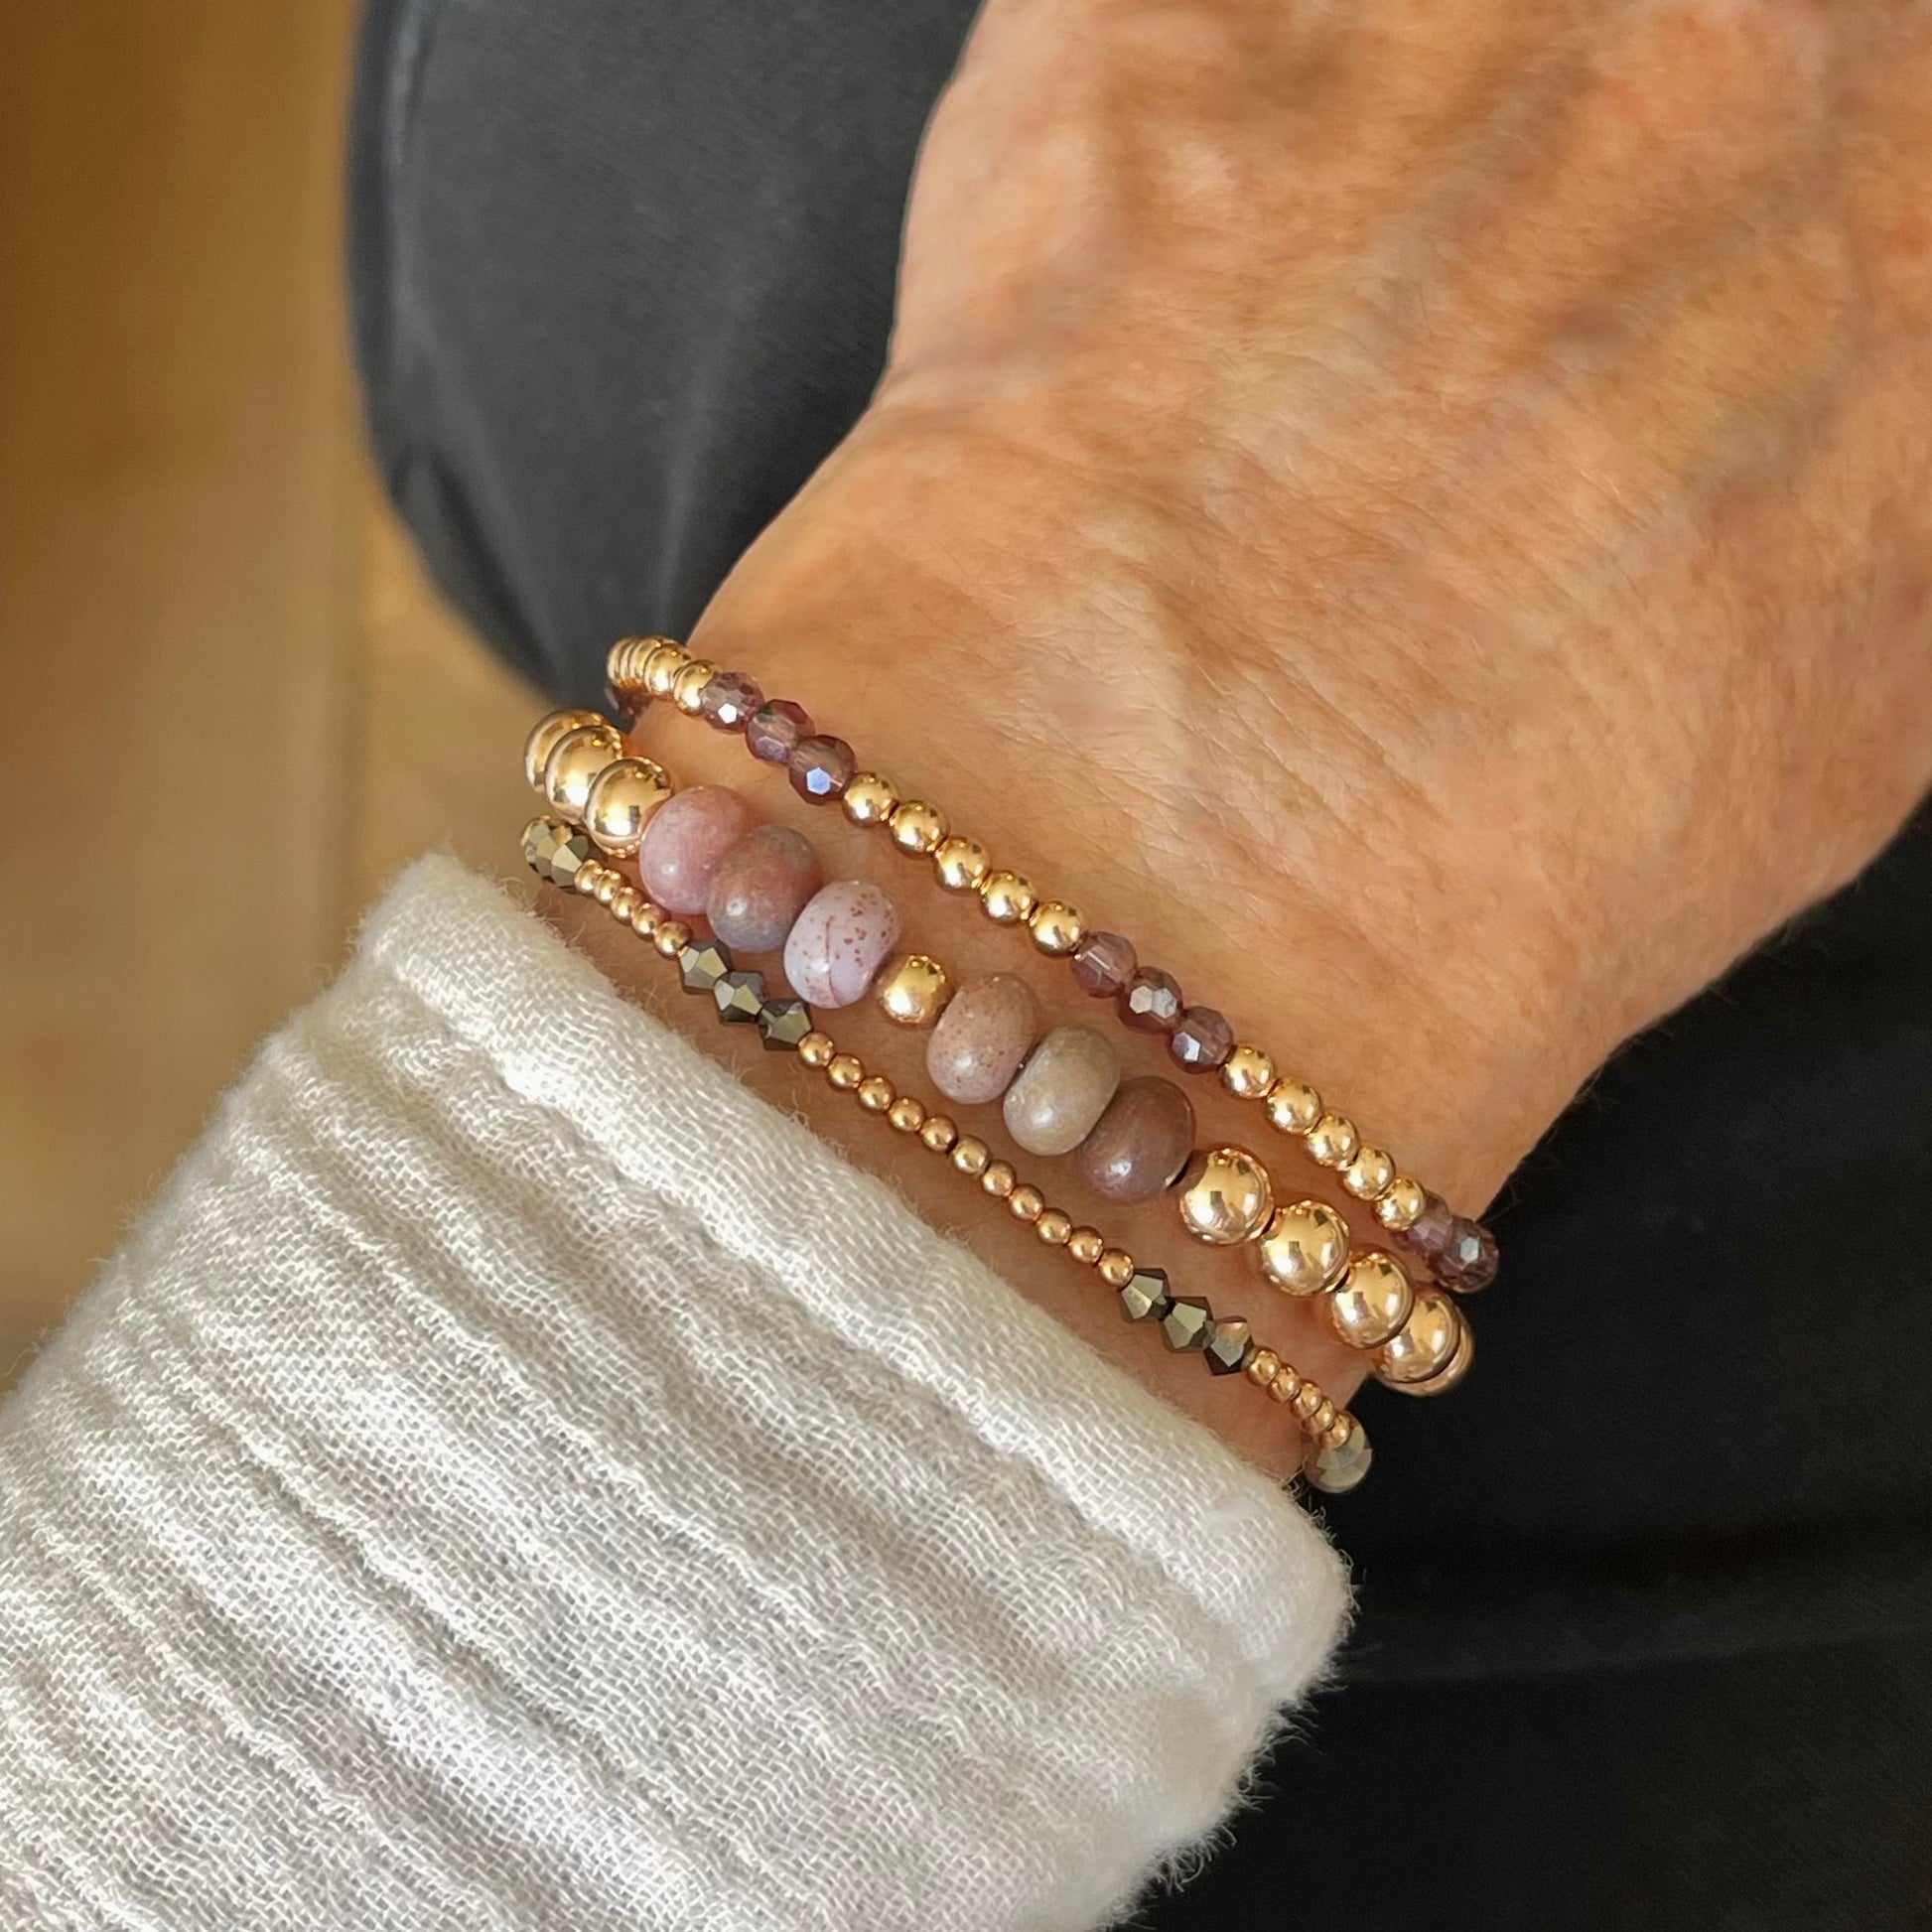 Purple and rose gold bracelet stack of 3 women's stretch bracelets with jasper, crystal, and glass beads.